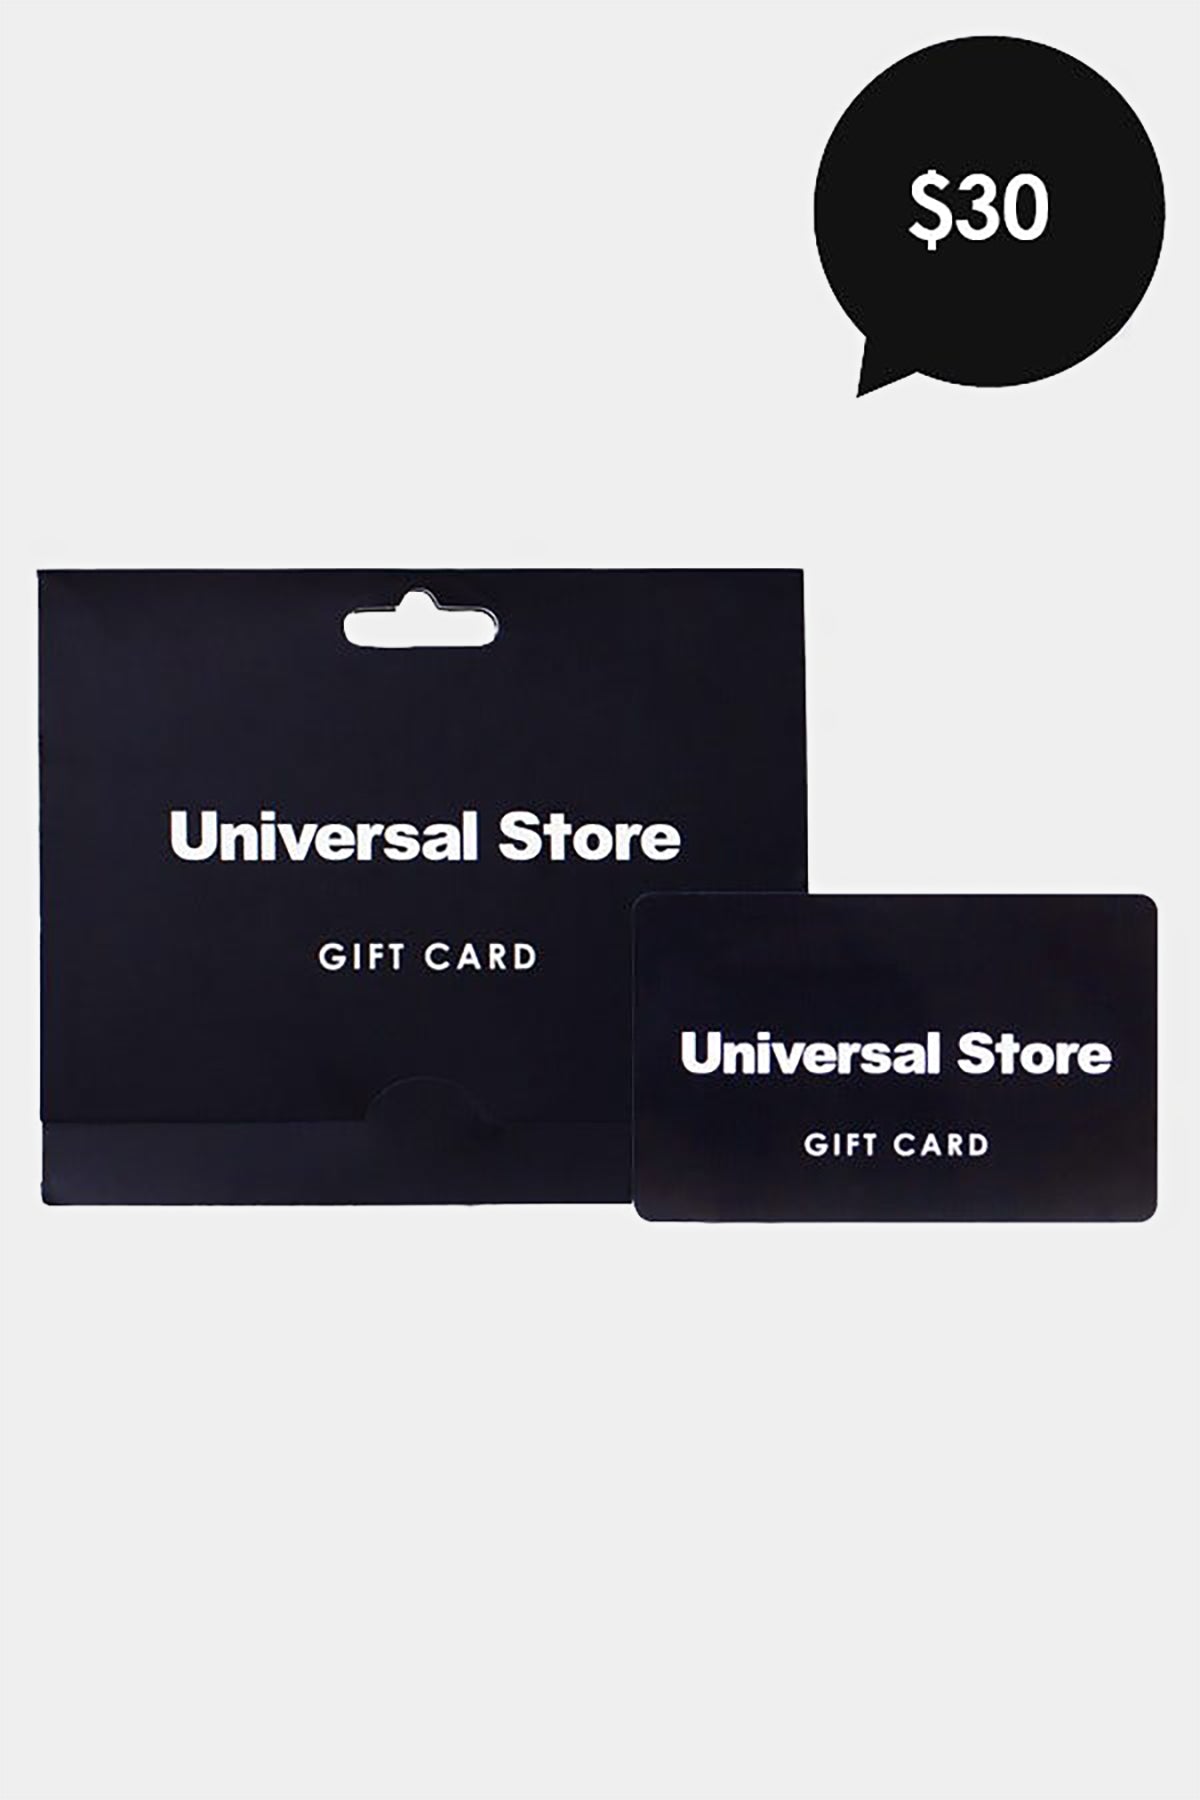 Universal Store $30 Gift Card